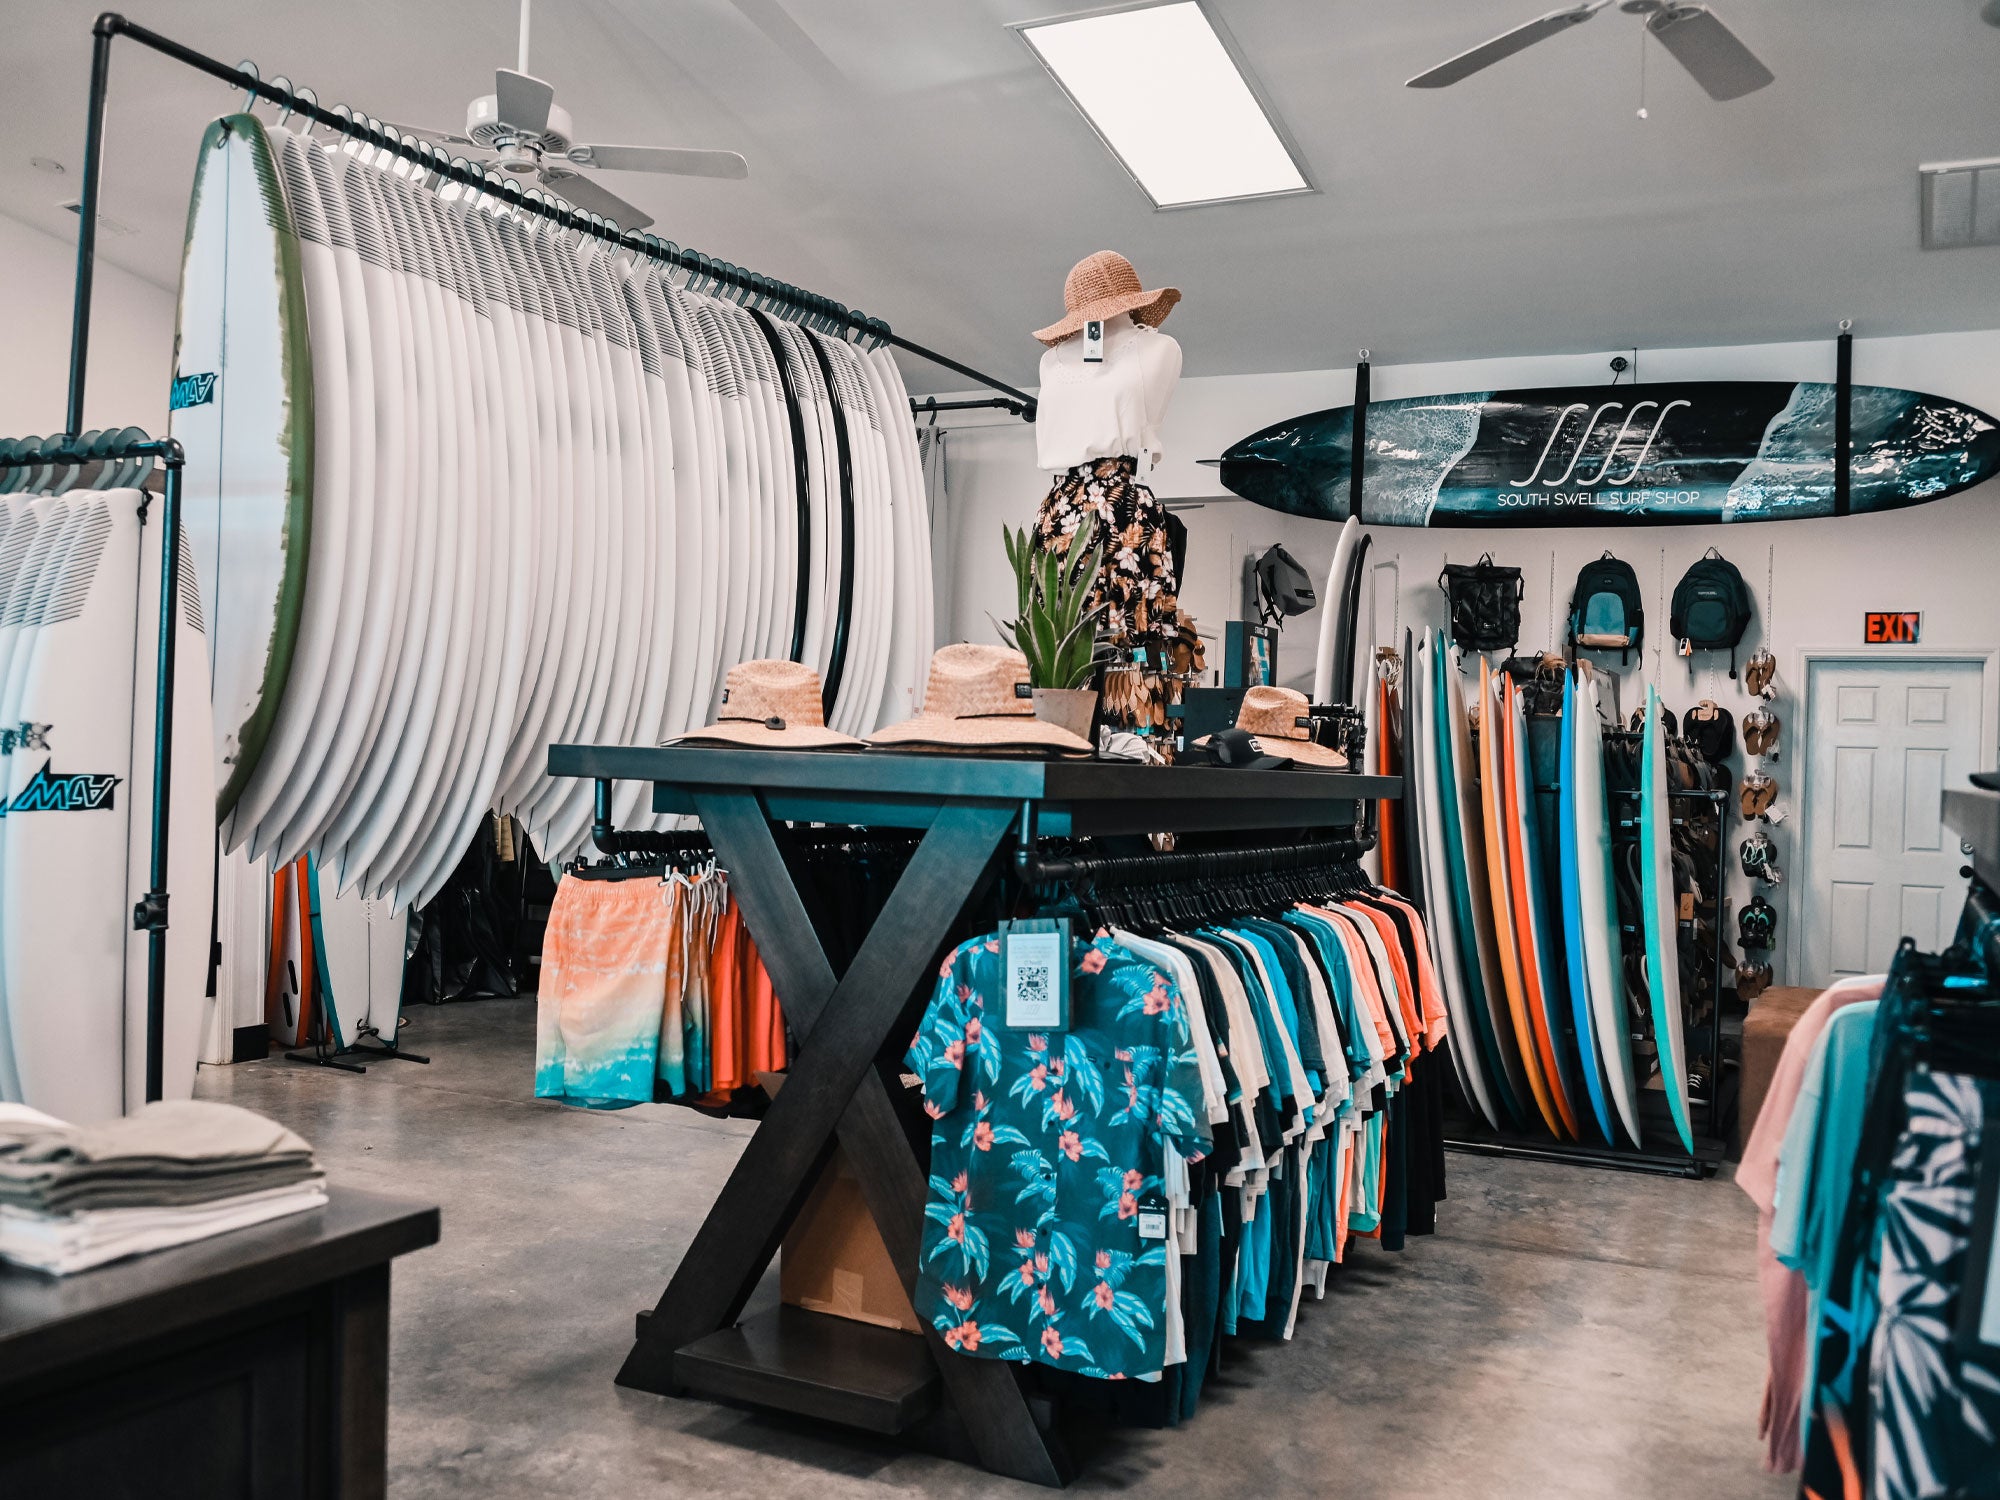 Rip Curl Sales Swell With eCommerce Personalization